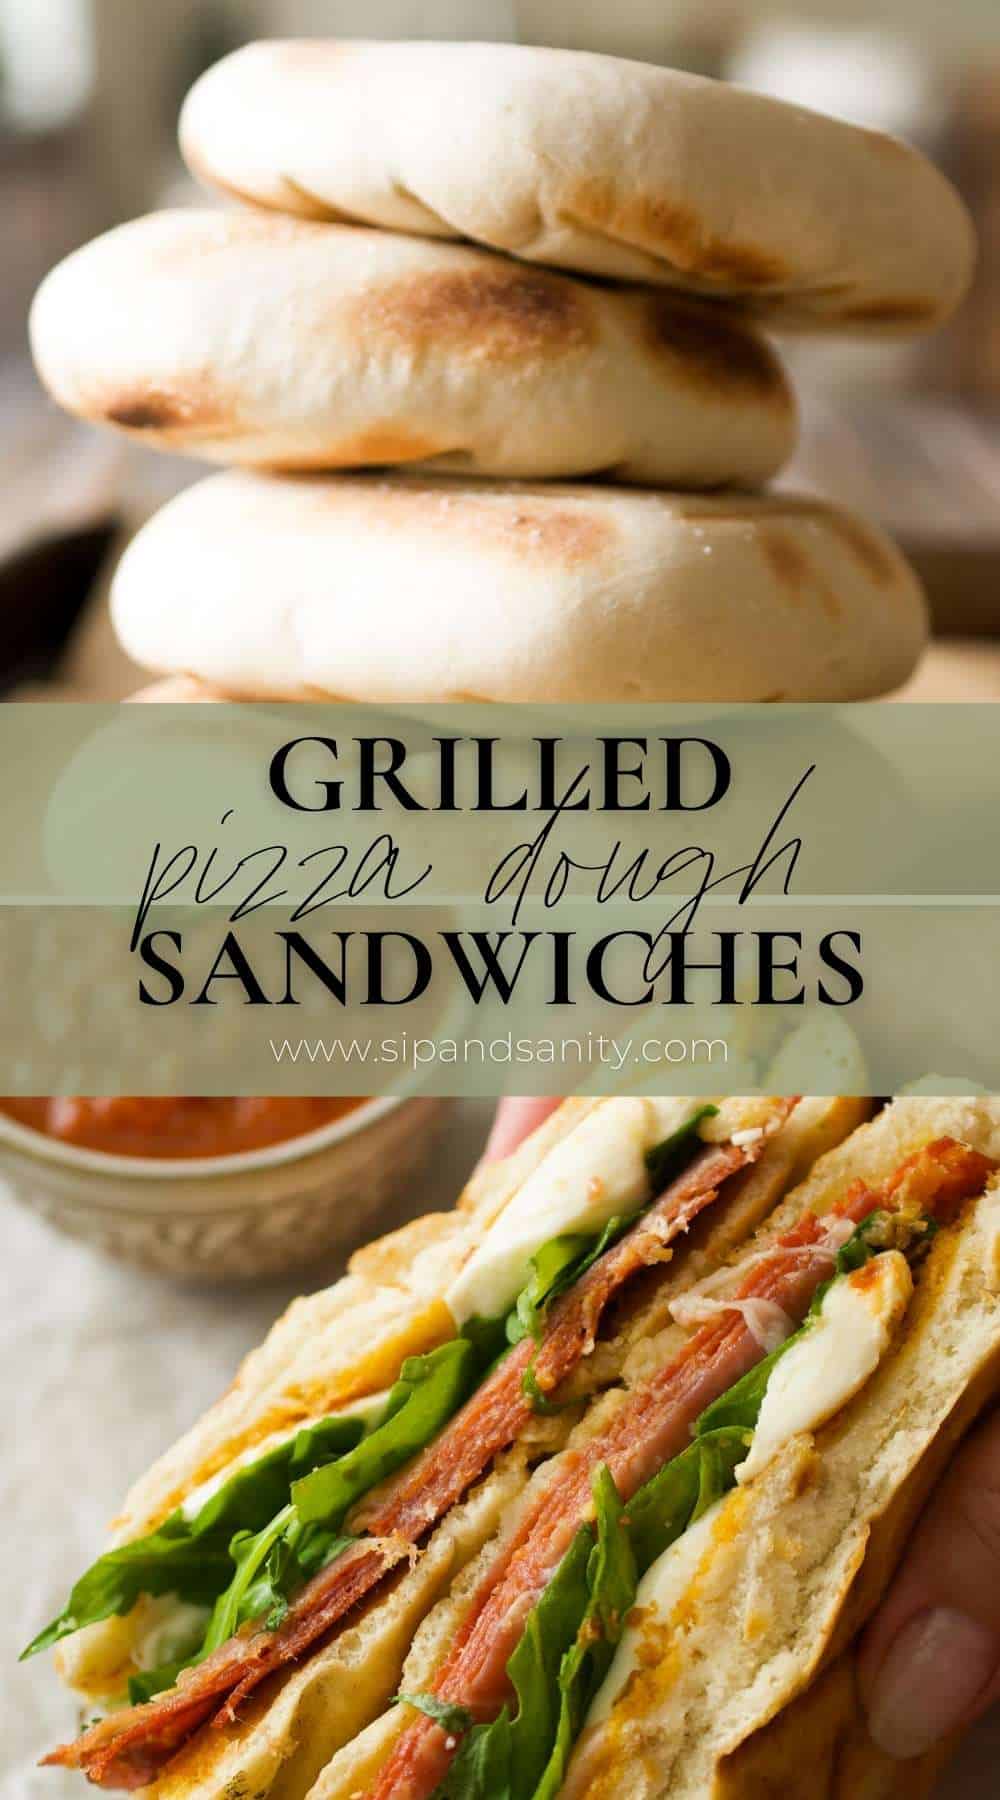 Pin image for grilled pizza dough sandwiches.